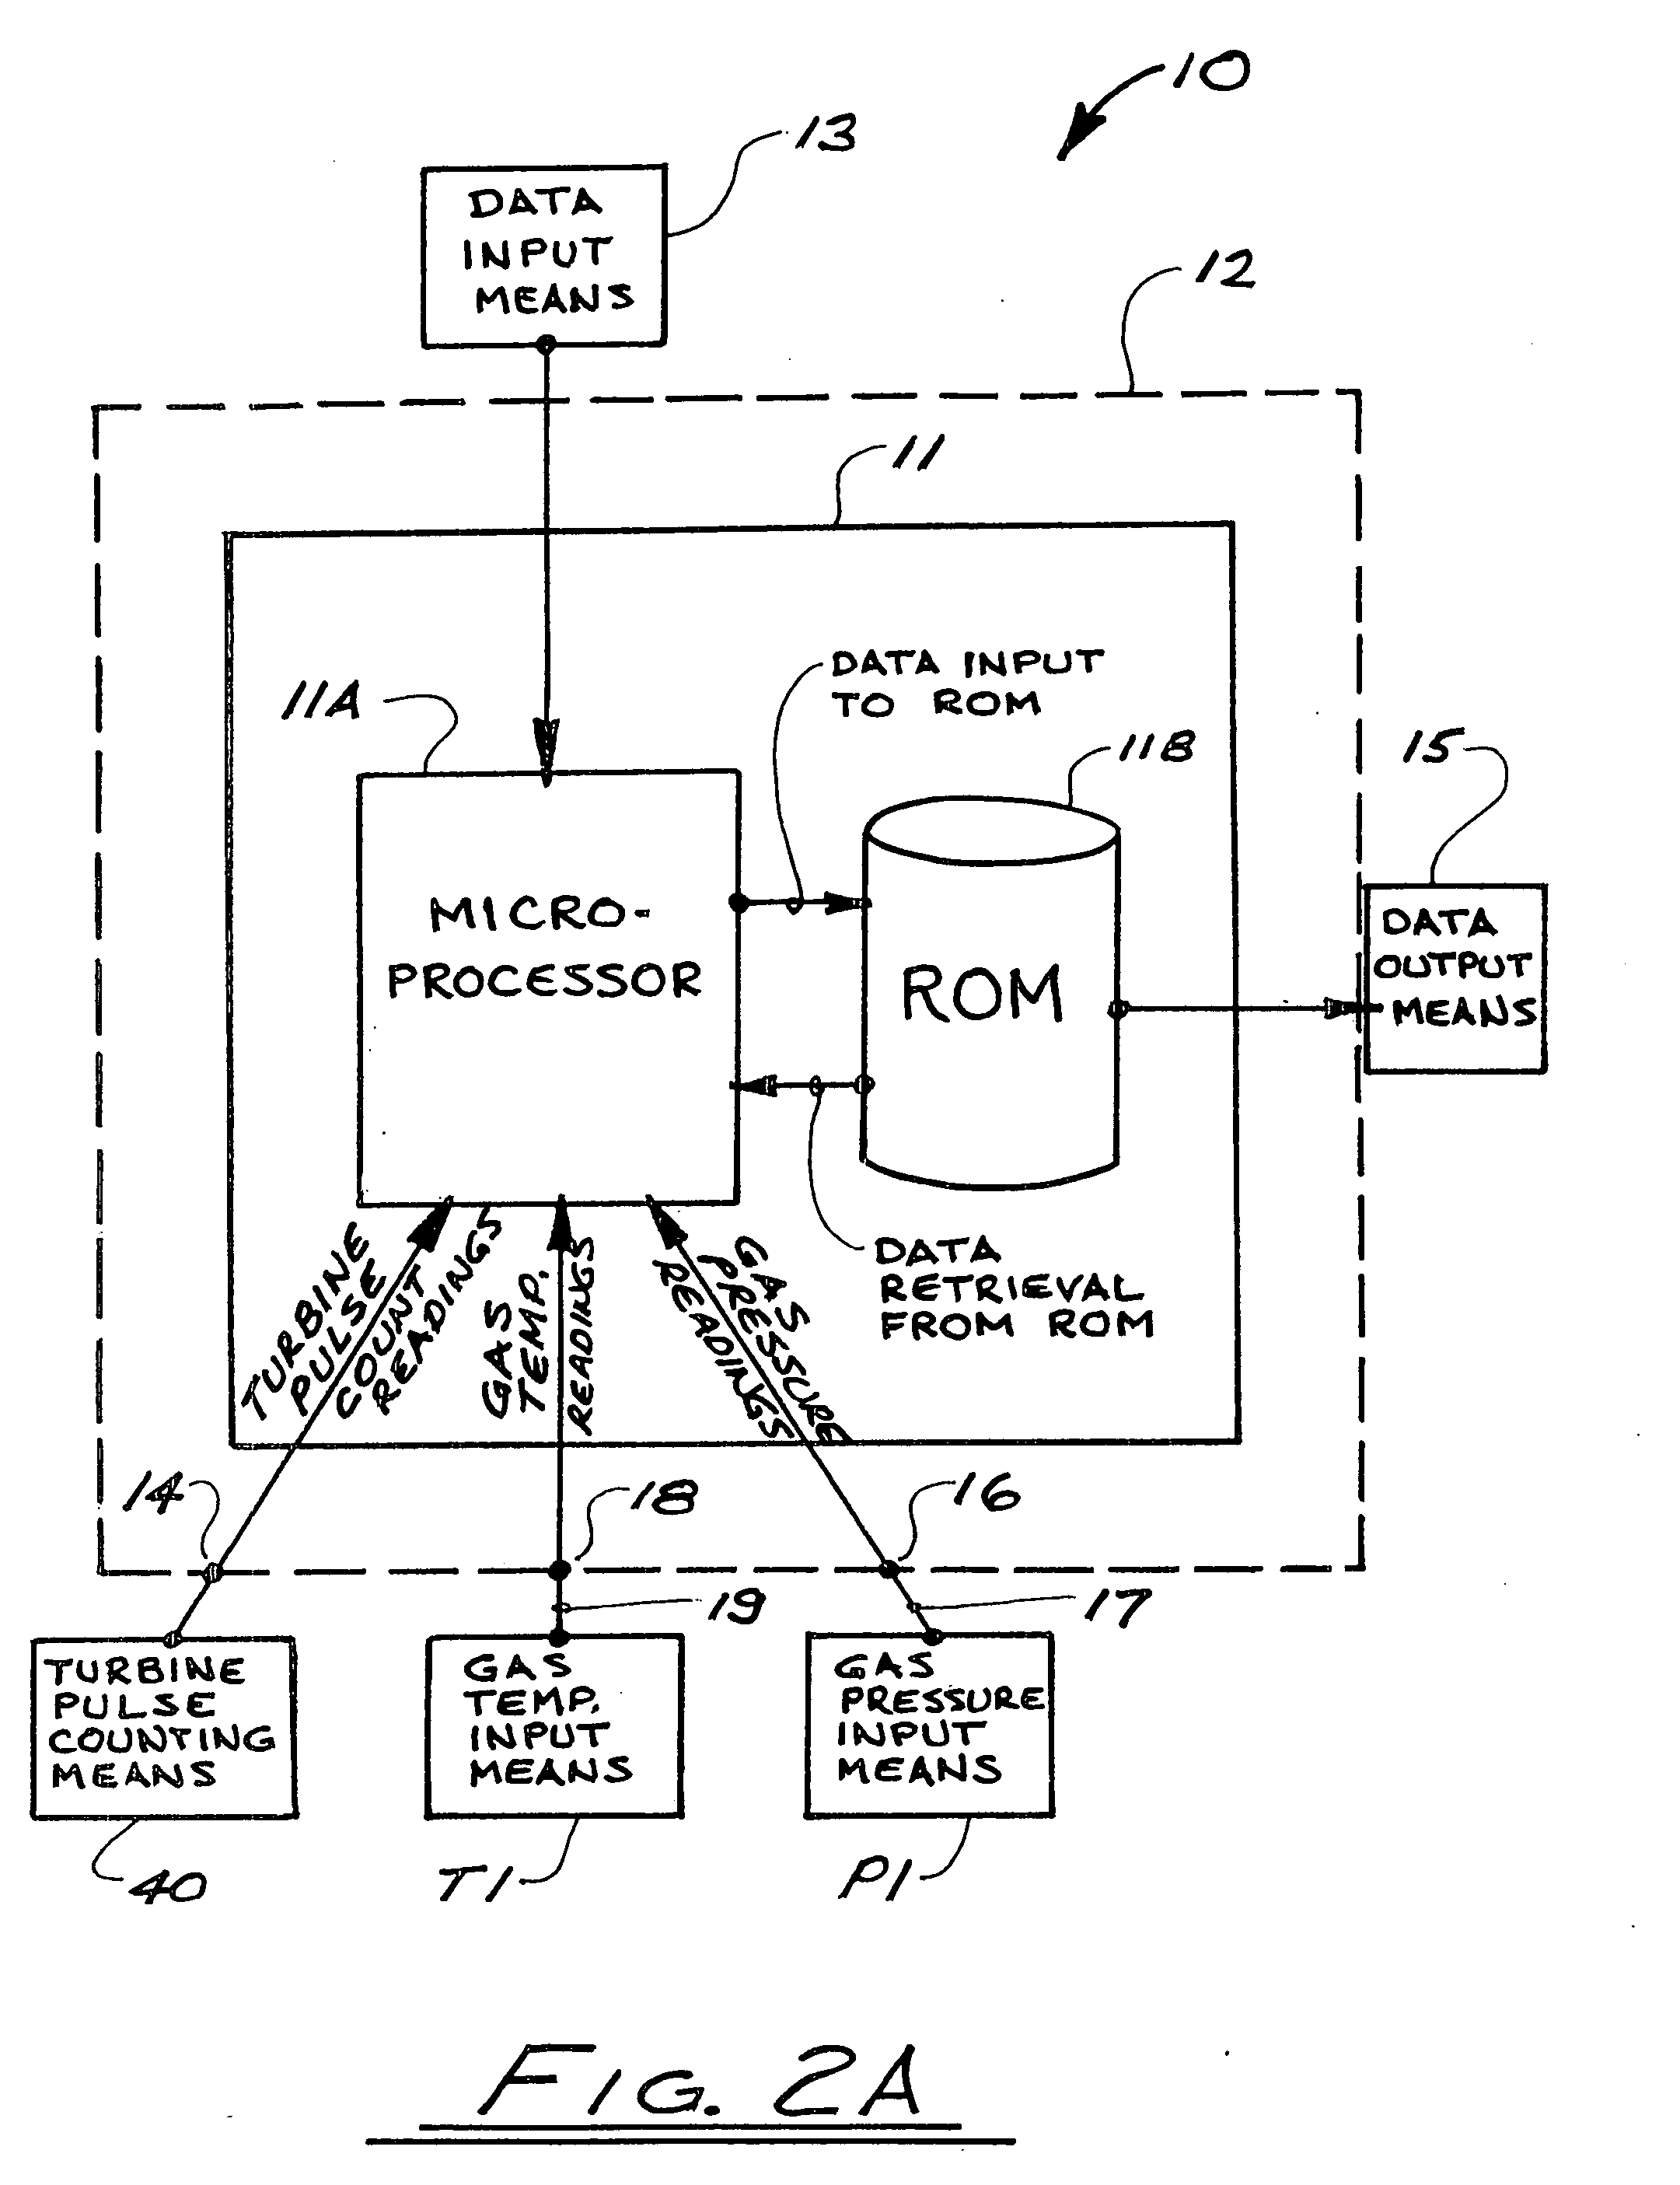 Electronic gas flow measurement and recording device